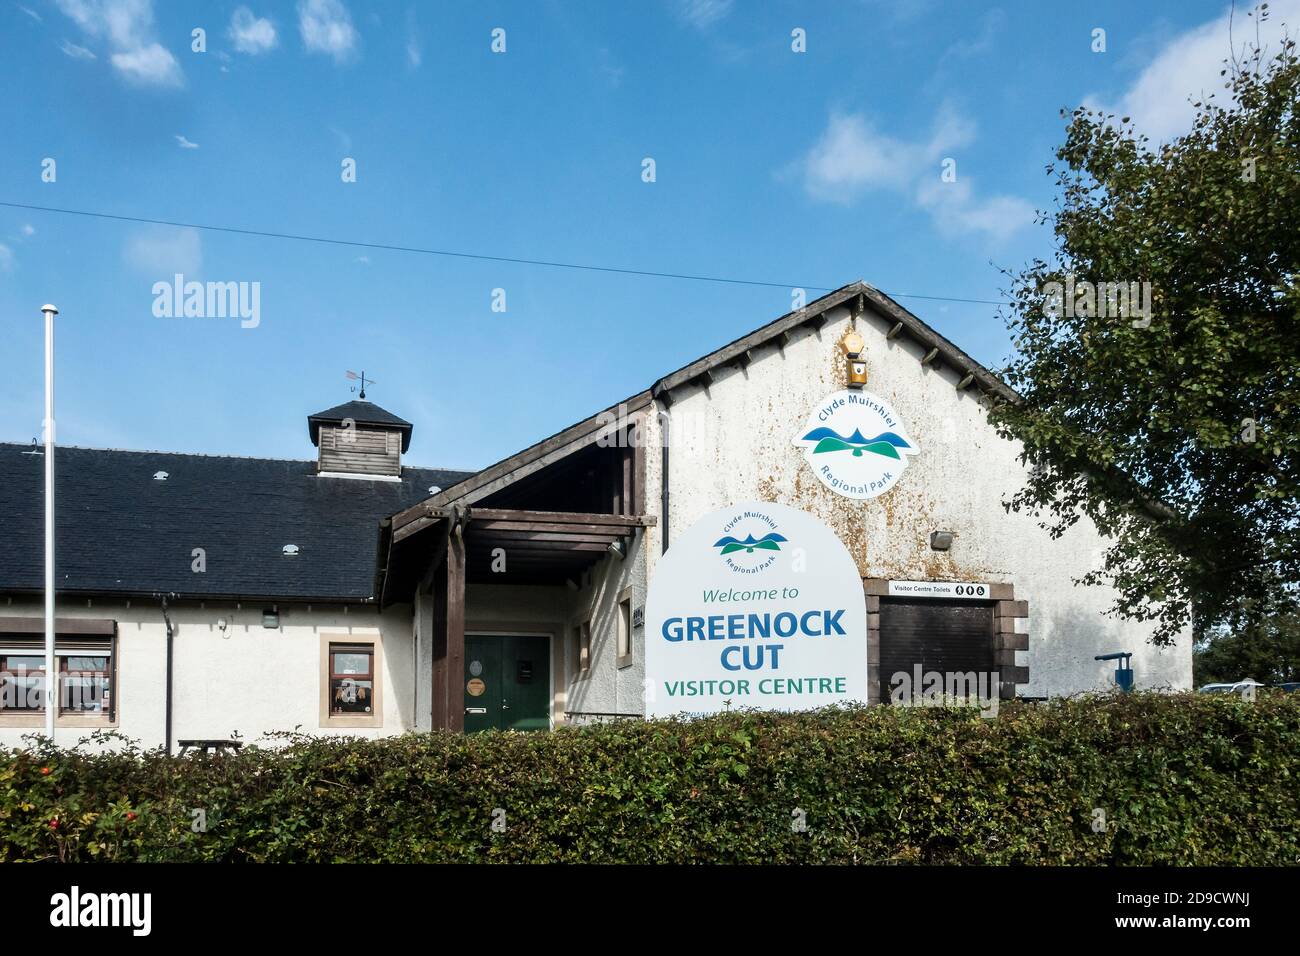 Exterior of Greenock Cut Visitor centre in Clyde Muirsheil Country Park. Near Greenock, Inverclyde, Scotland Stock Photo